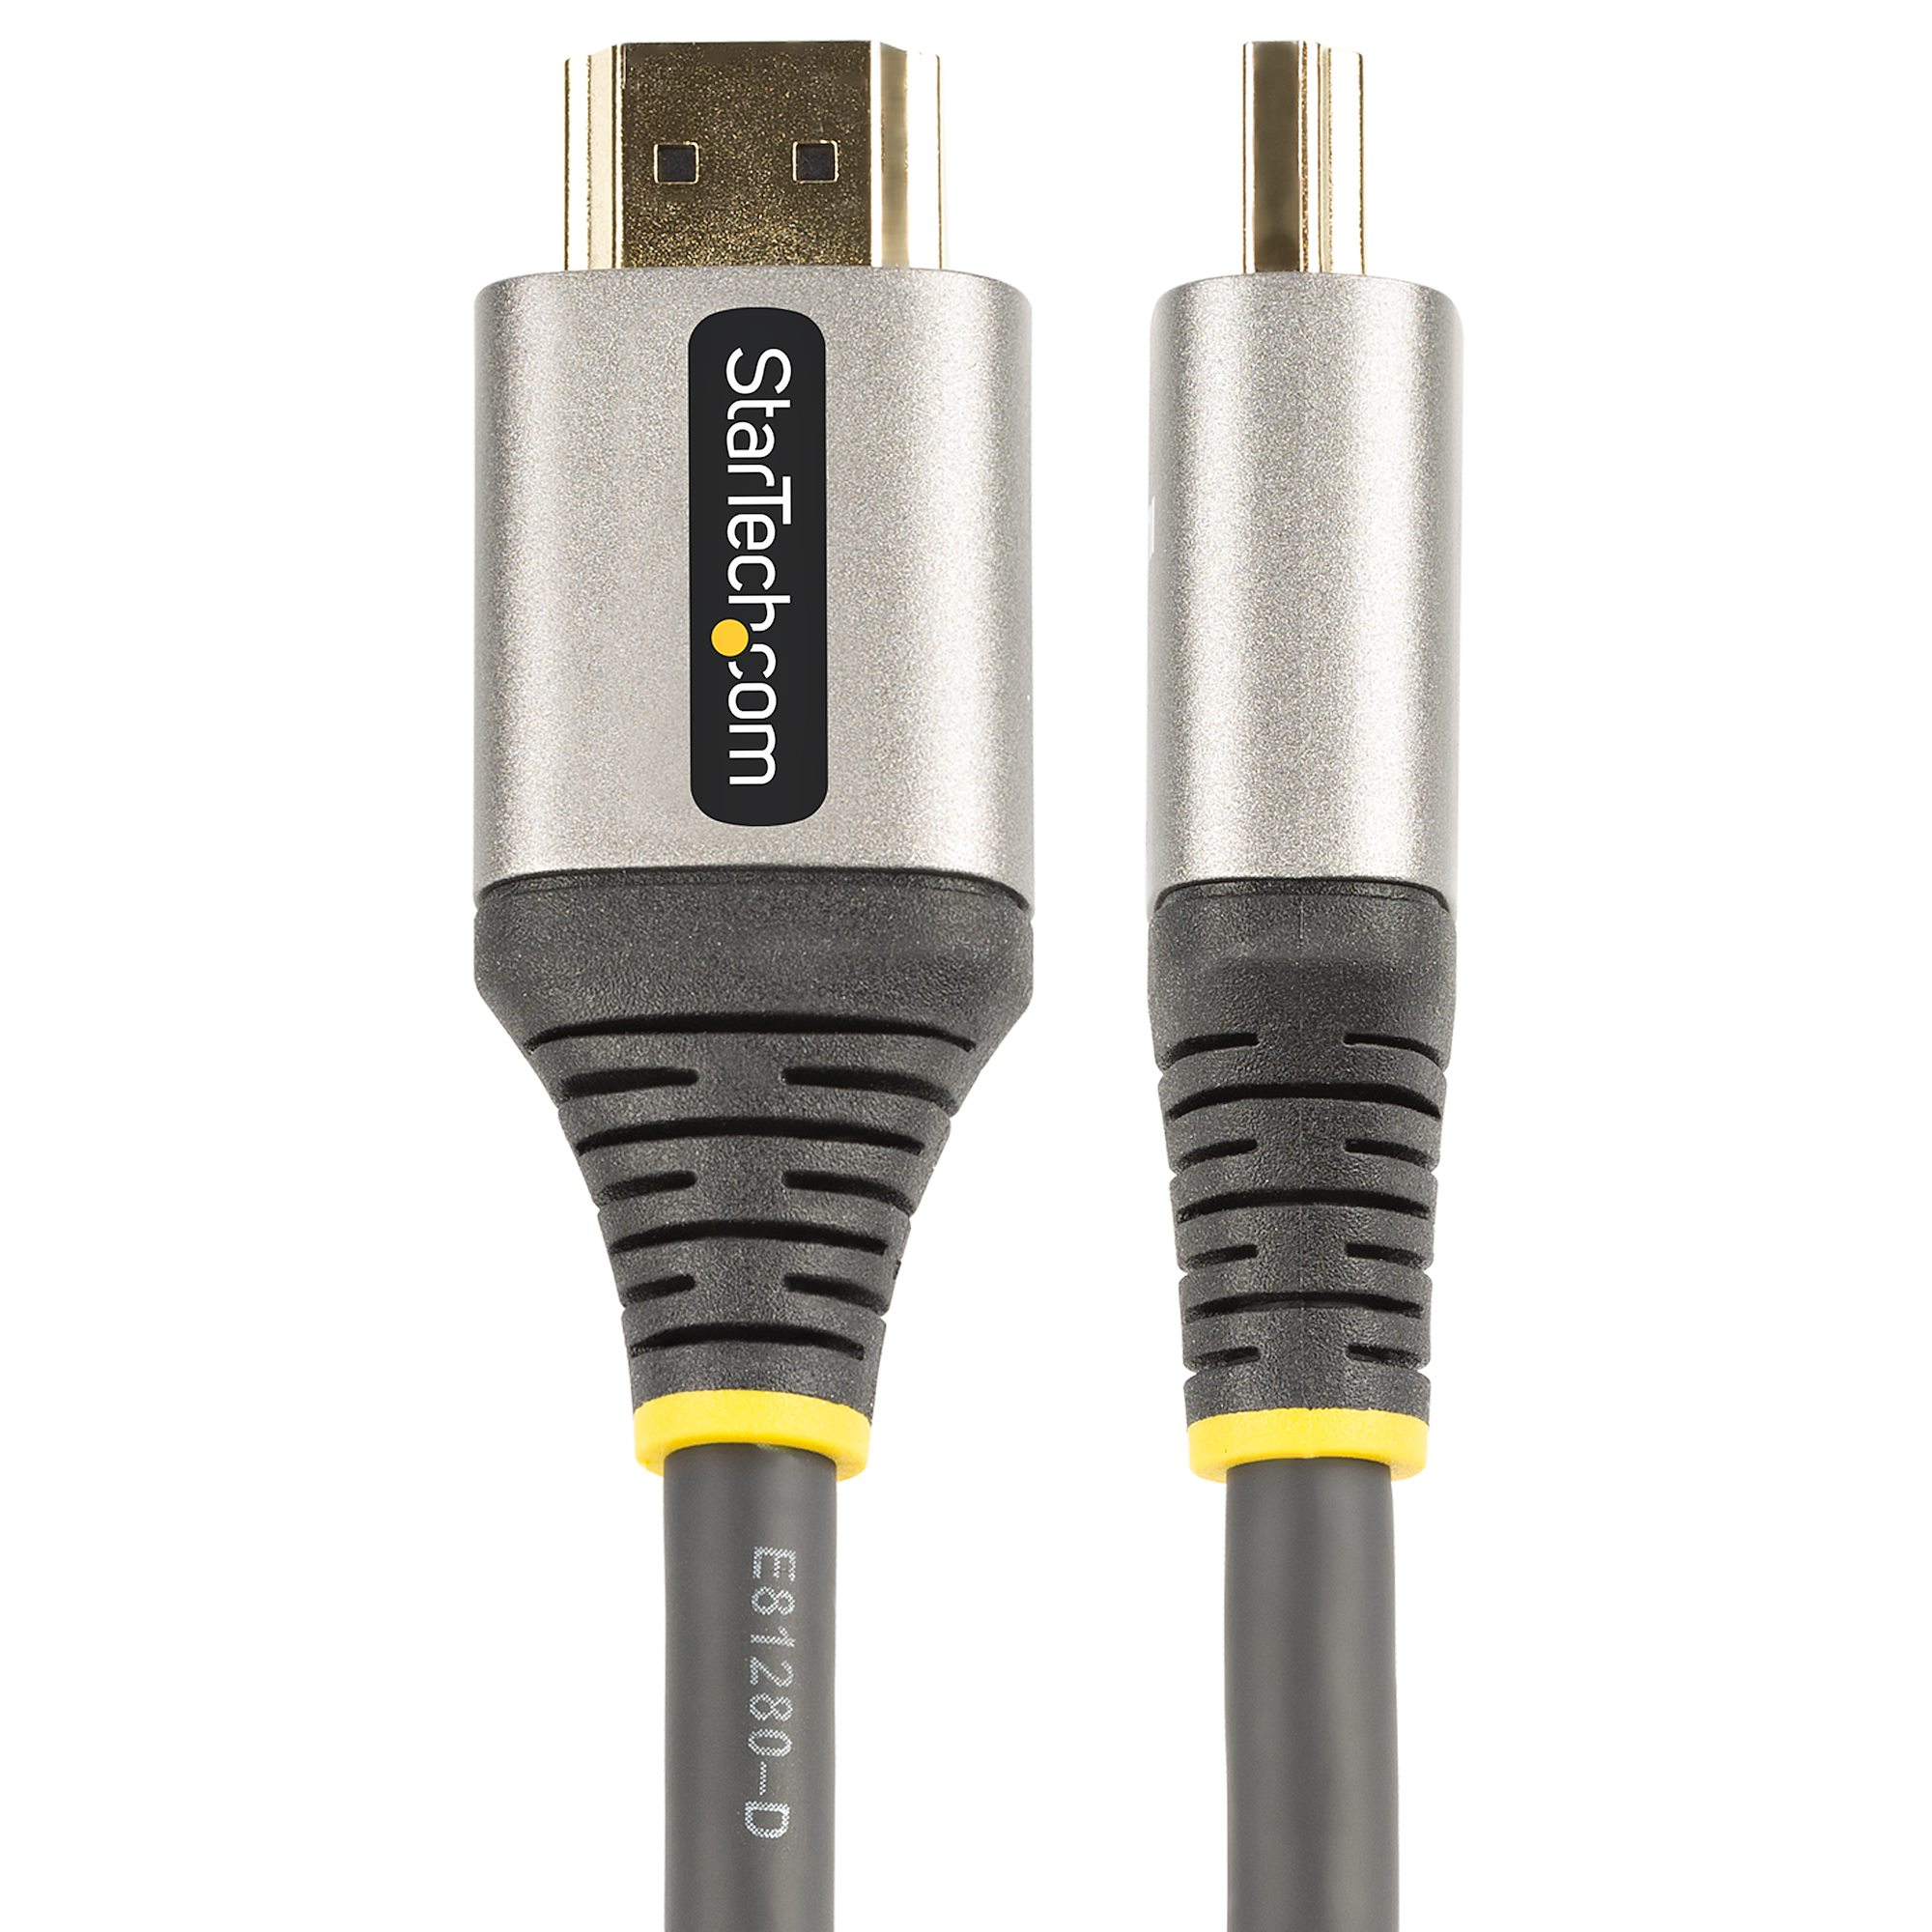 6.6ft (2m) High Speed HDMI® to Mini HDMI Cable with Ethernet - 4K 60Hz